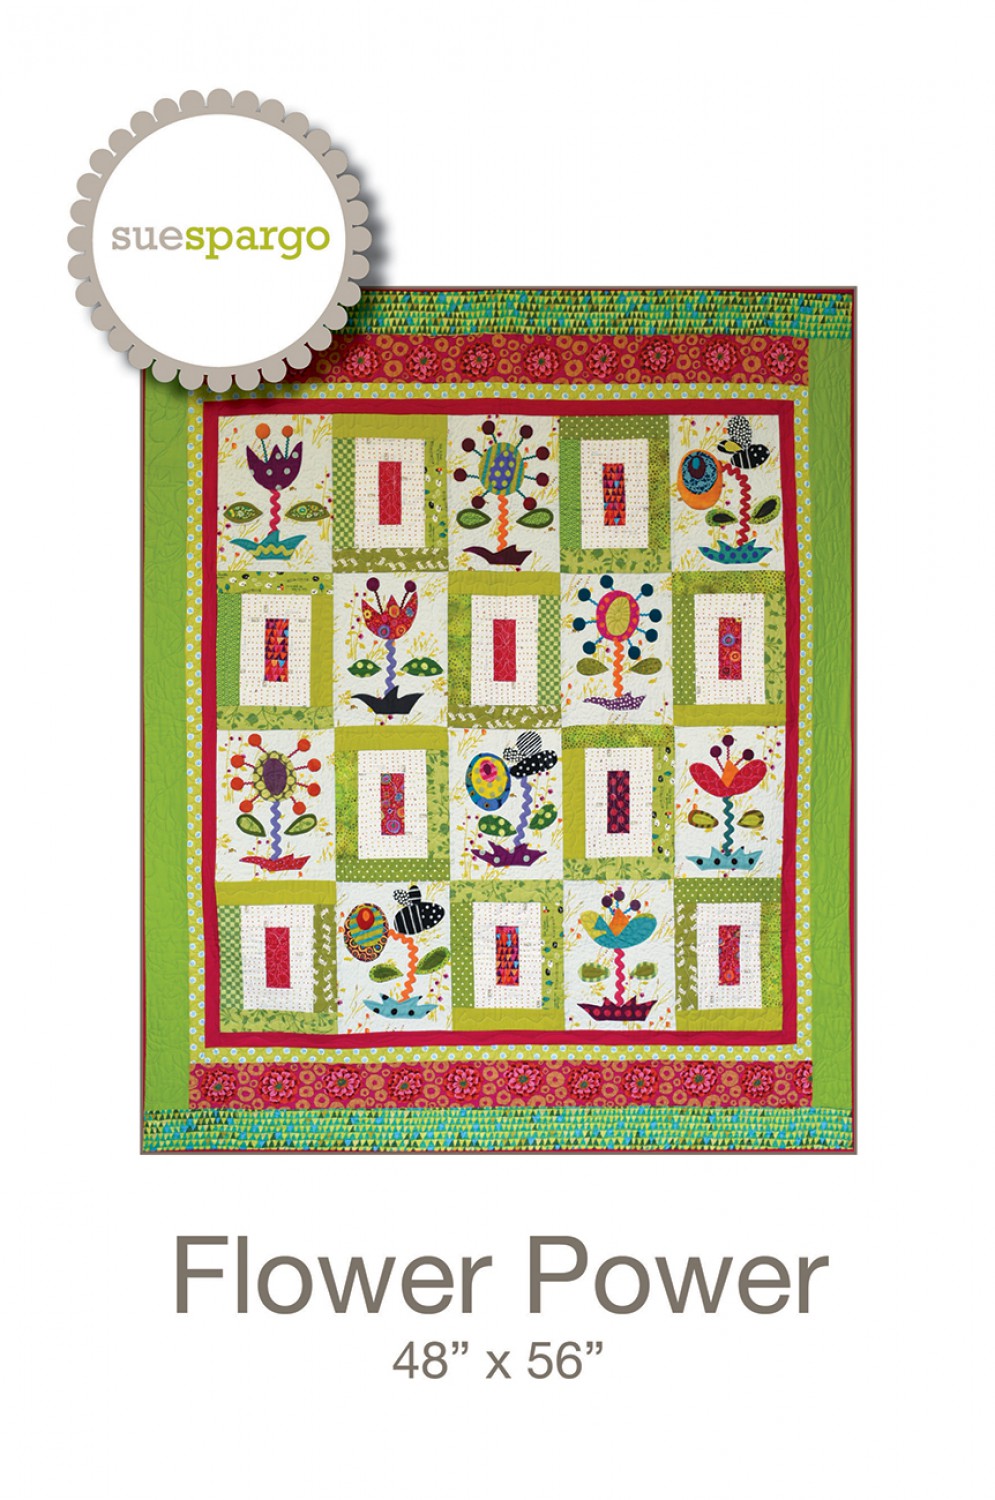 Flower Power - Applique, Embroidery, and Quilting Pattern by Sue Spargo of Folk Art Quilts